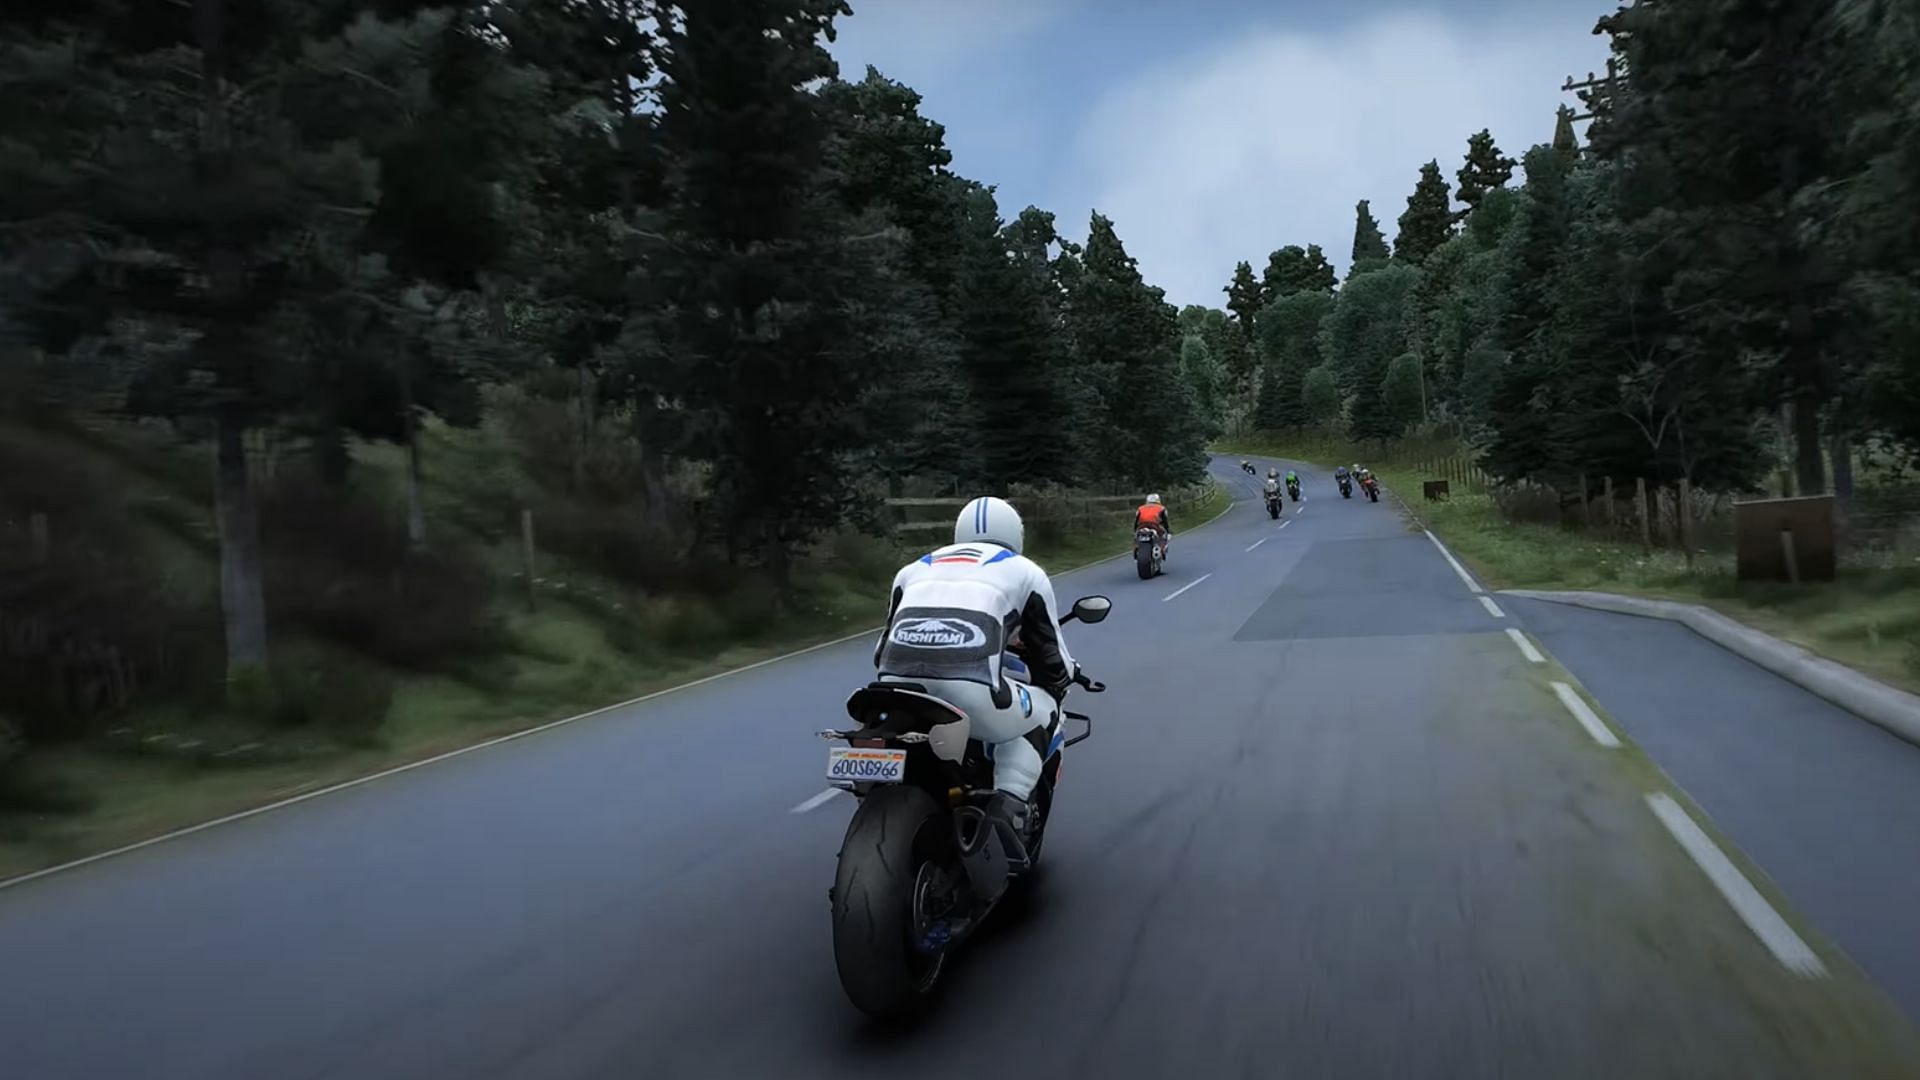 A screenshot from the modded motorcycle race gameplay. (Image via YouTube/@Gam3_4_Lif3)